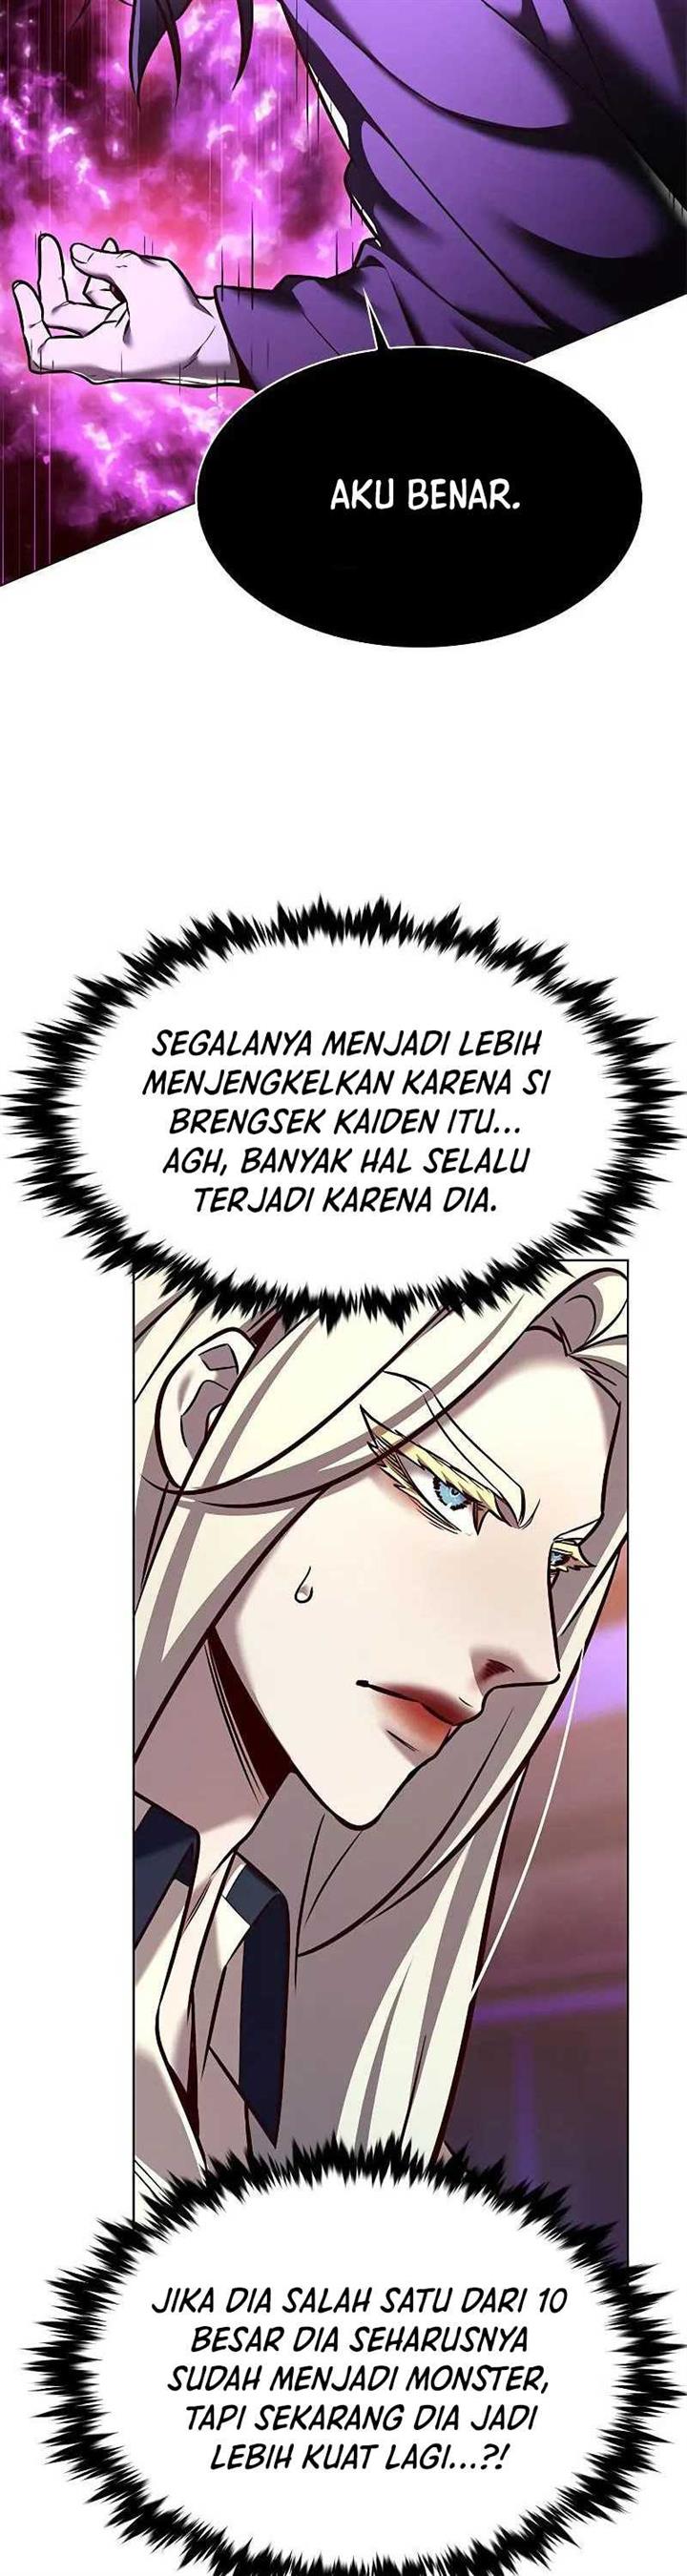 Eleceed Chapter 271